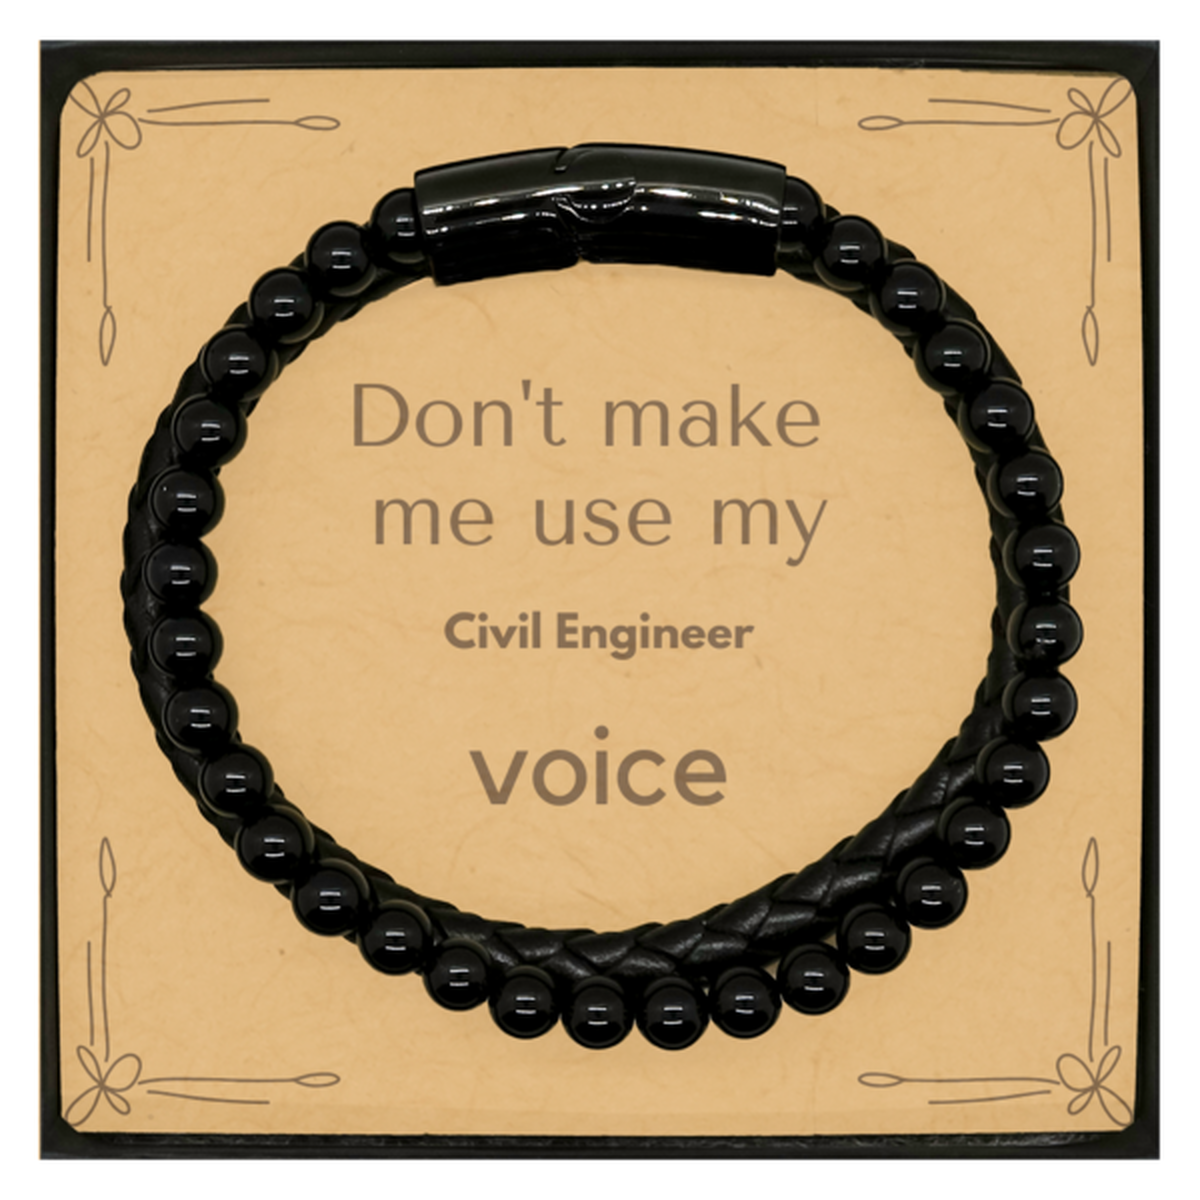 Don't make me use my Civil Engineer voice, Sarcasm Civil Engineer Card Gifts, Christmas Civil Engineer Stone Leather Bracelets Birthday Unique Gifts For Civil Engineer Coworkers, Men, Women, Colleague, Friends